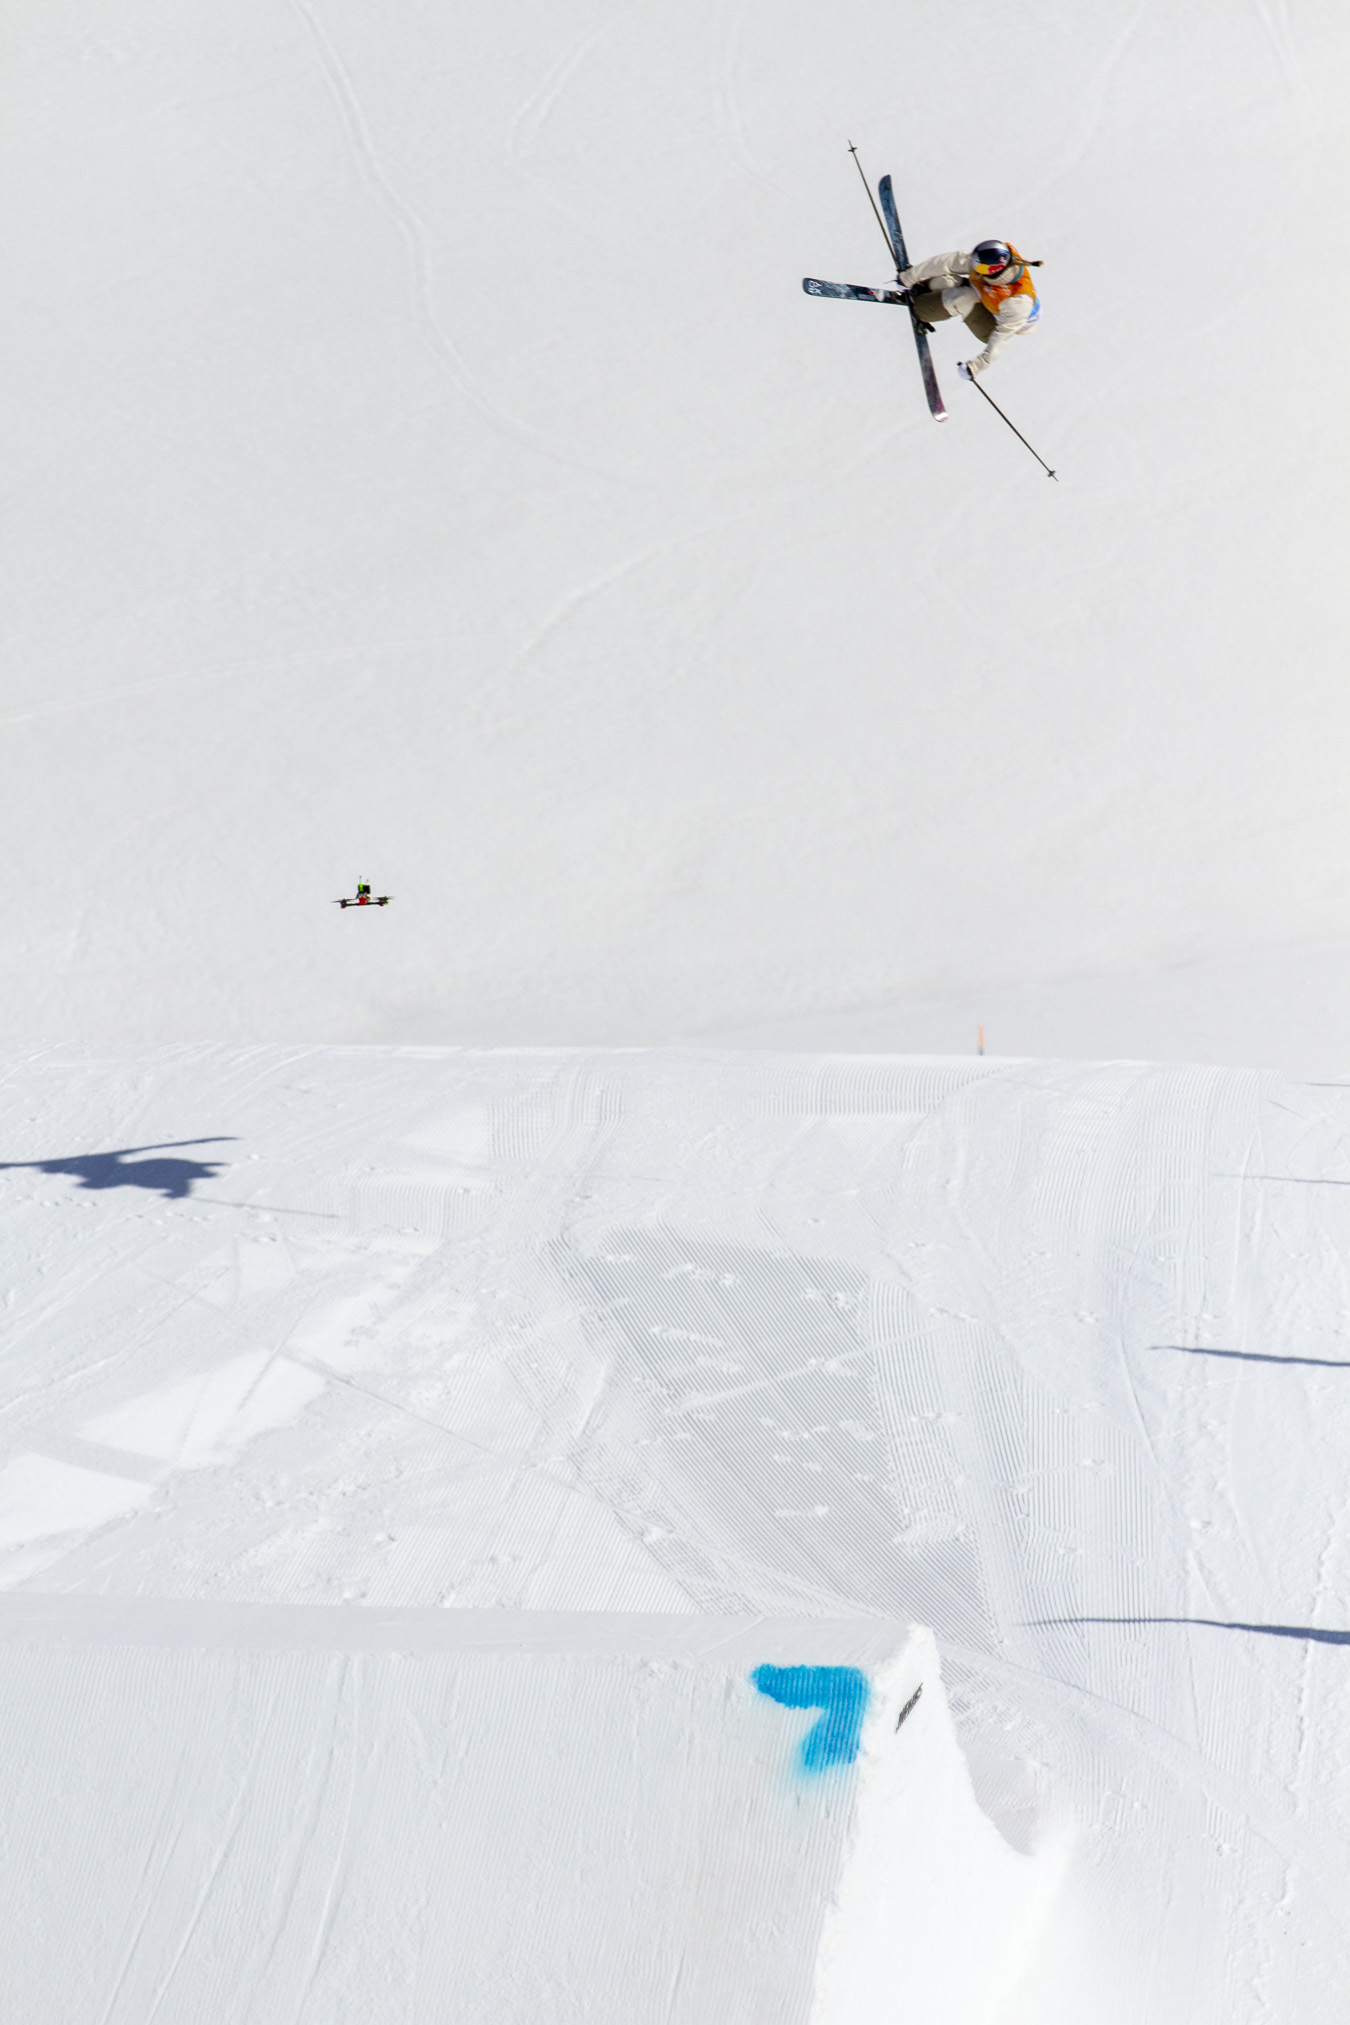 Tess Ledeux at the World Cup slopestyle in Corvatsch, Switzerland